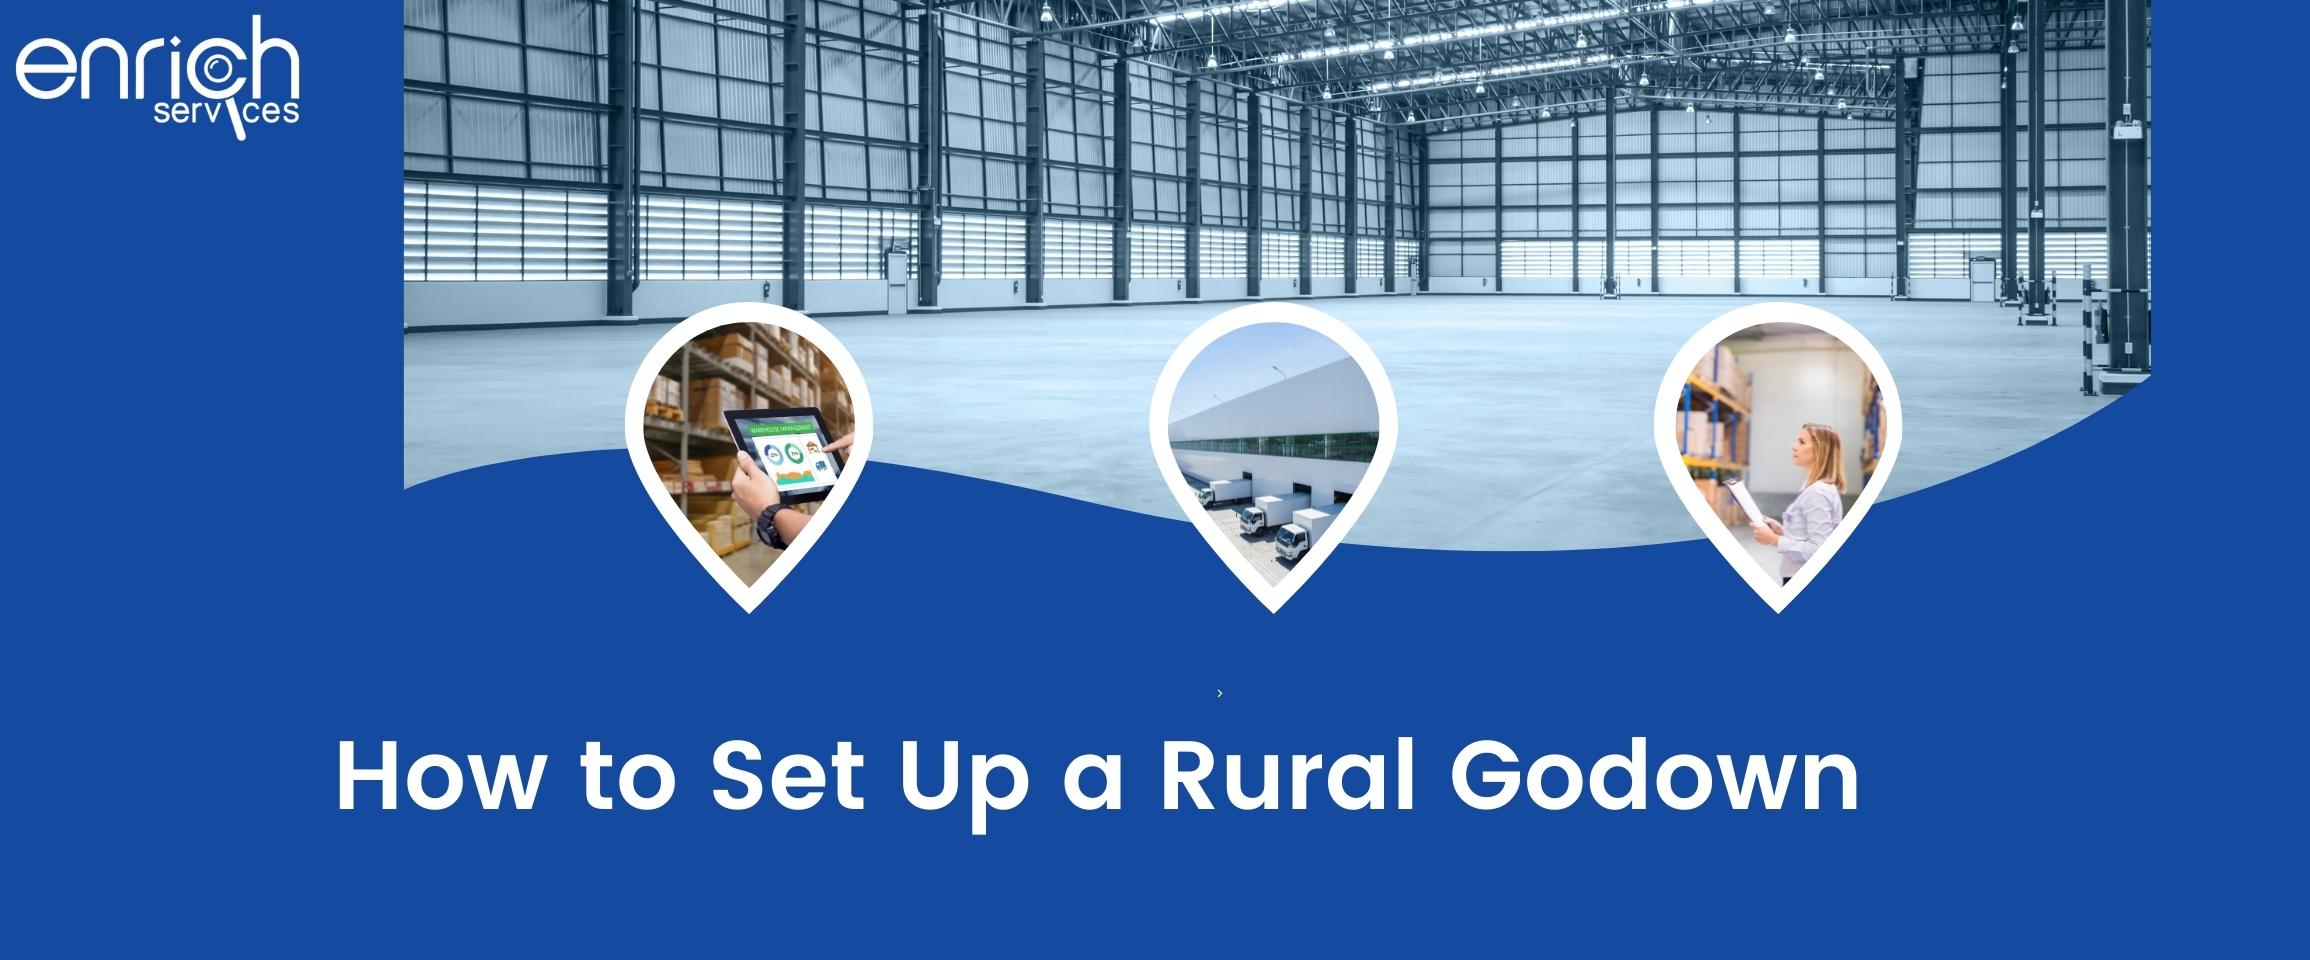 How to Set Up a Rural Godown / Warehouses under Nabard Subsidy scheme : A Complete Guide